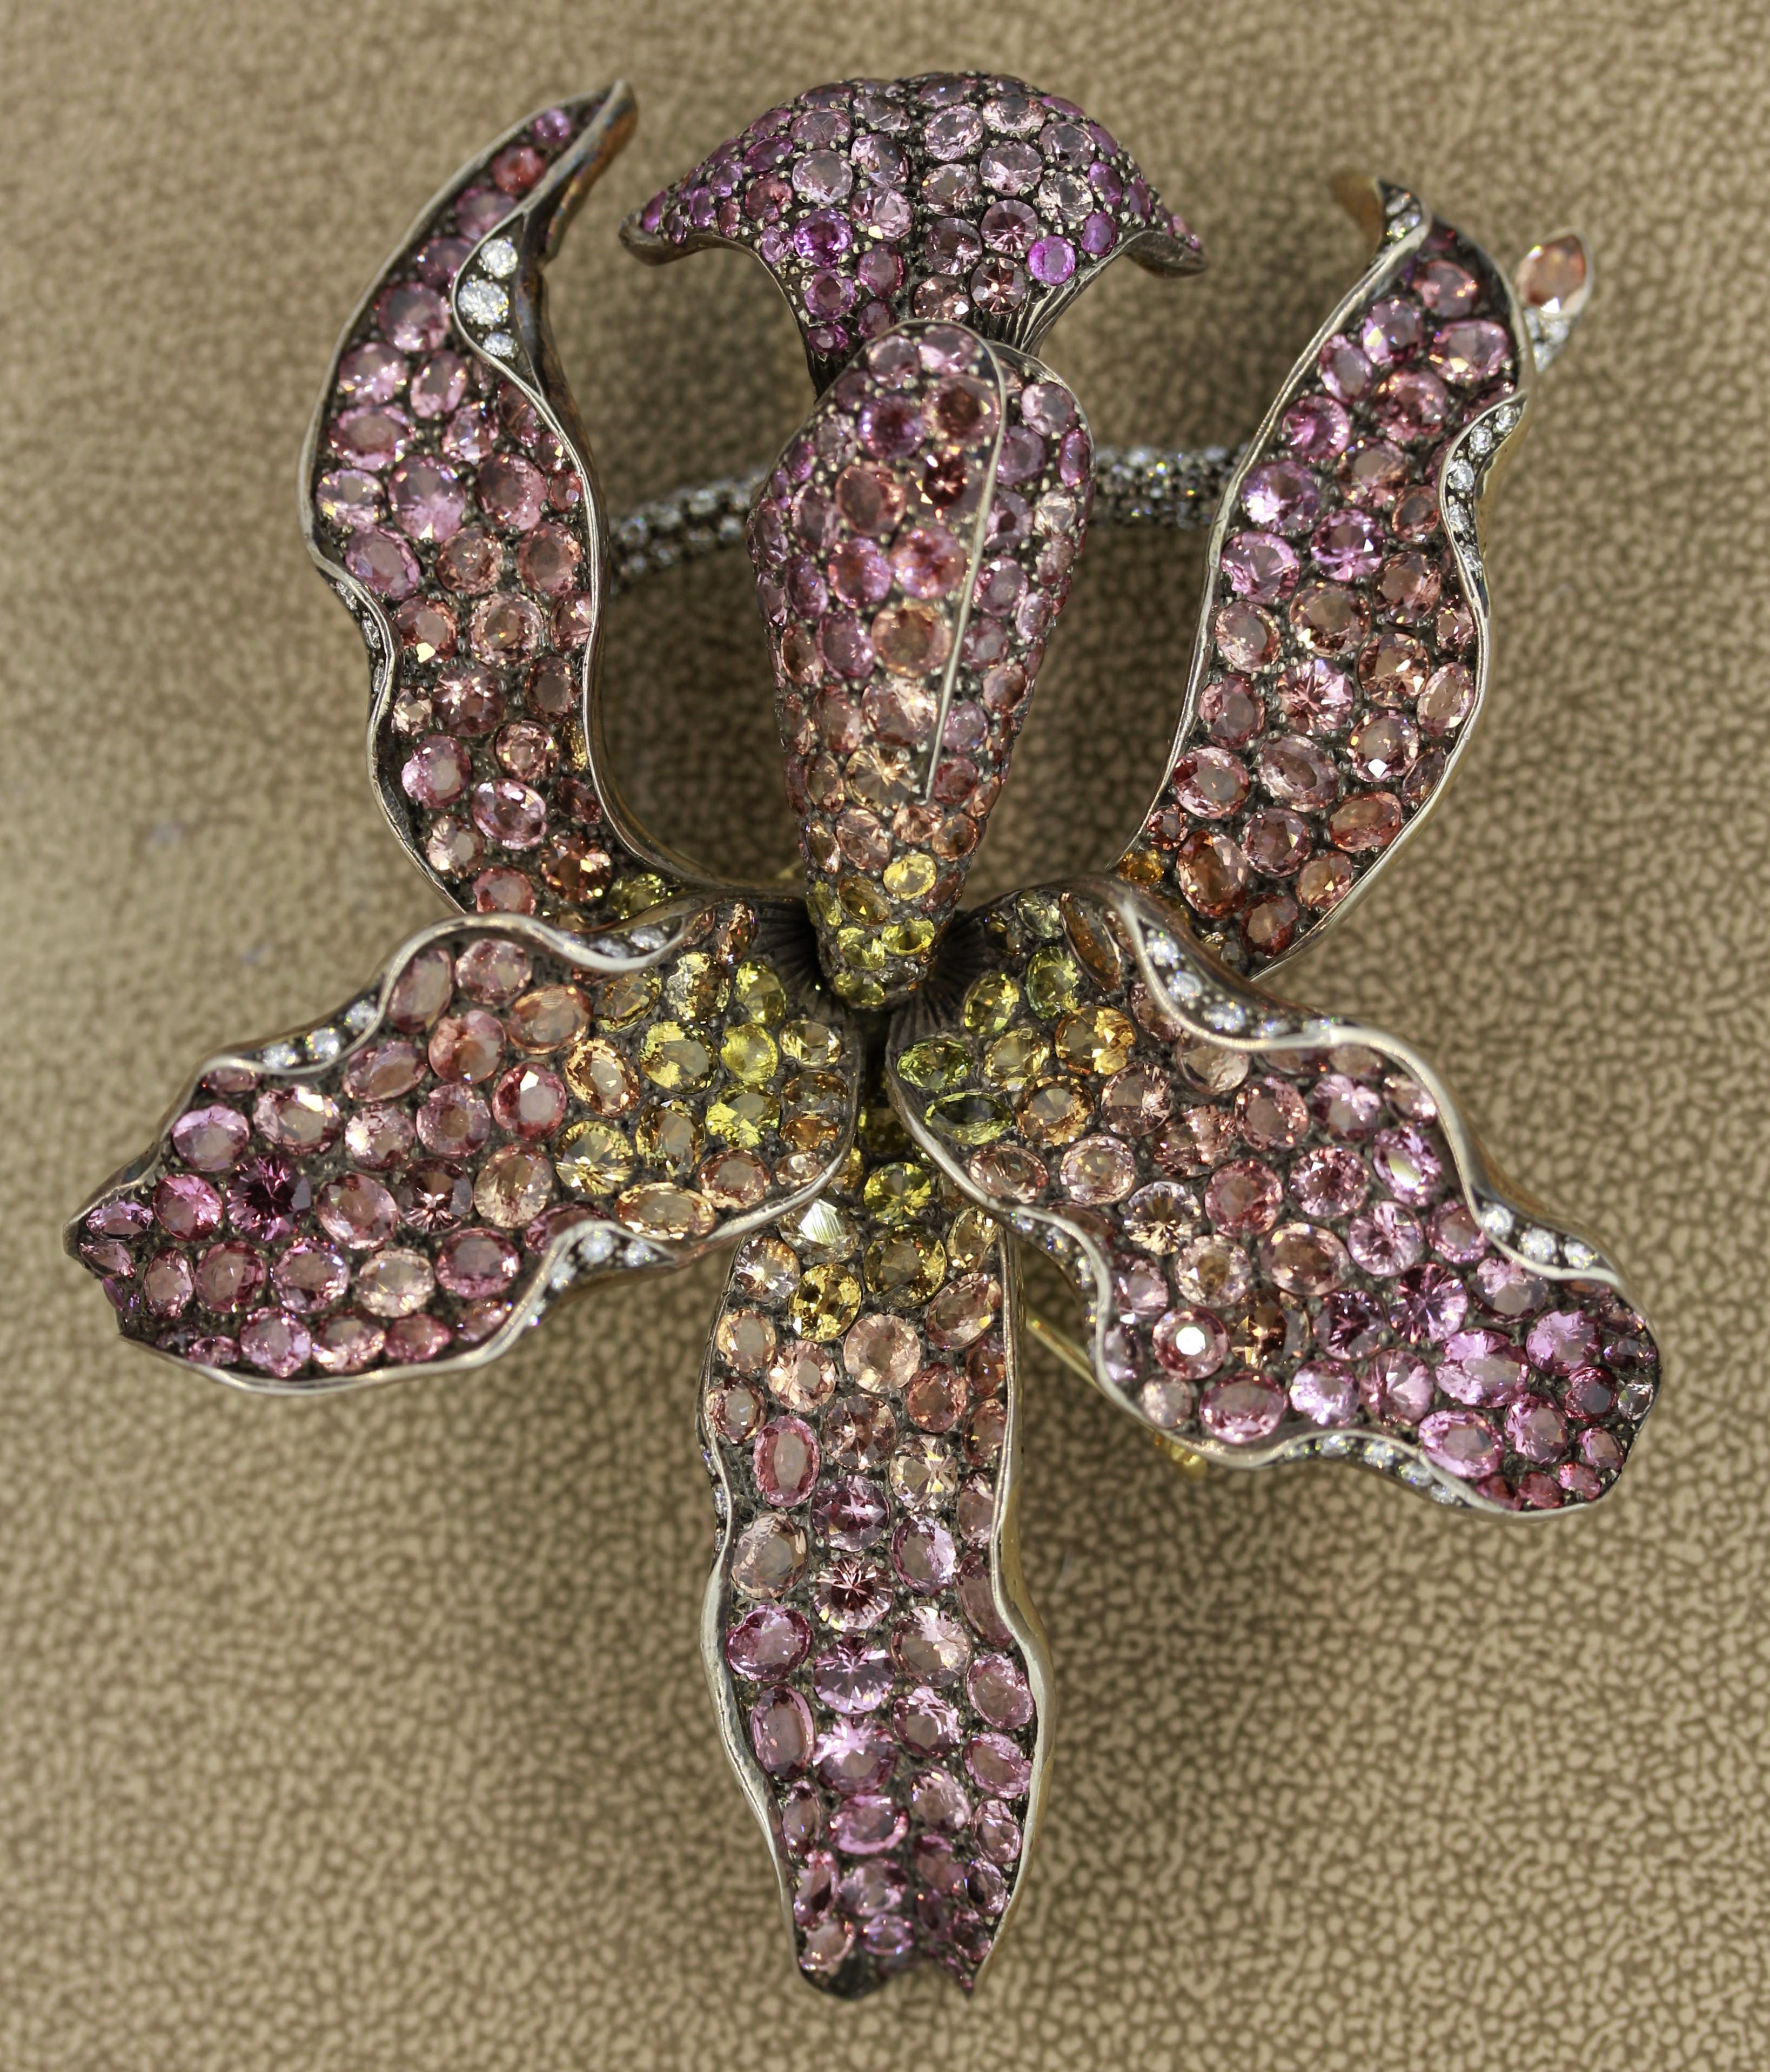 A magnificent and large gold brooch depicting a colorful orchid in full blossom. It features 44 carats of Padparadscha sapphires with a mesmerizing orangy-pink color along with yellow sapphires closer to the center of the flower. The stem of the